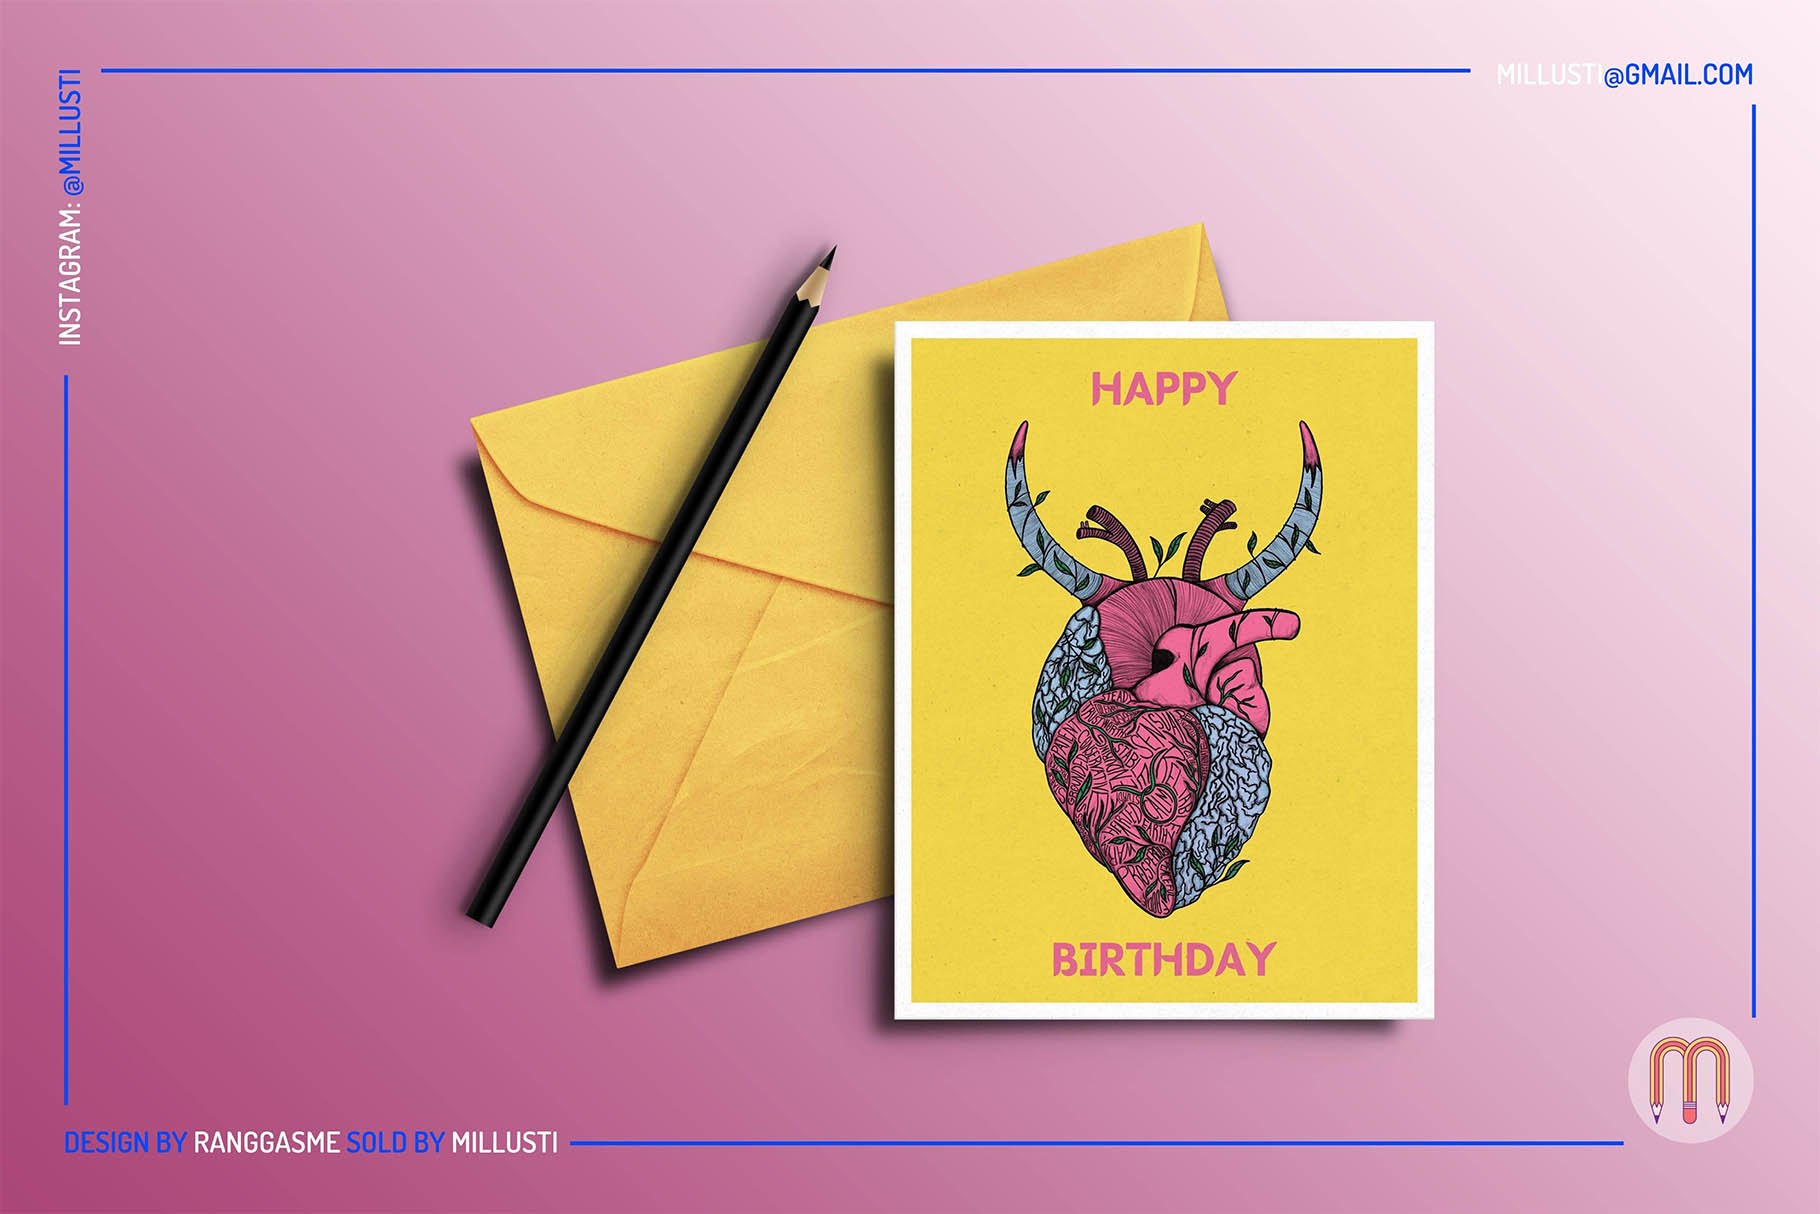 Yellow postcard with a greeting and colorful astrology heart.